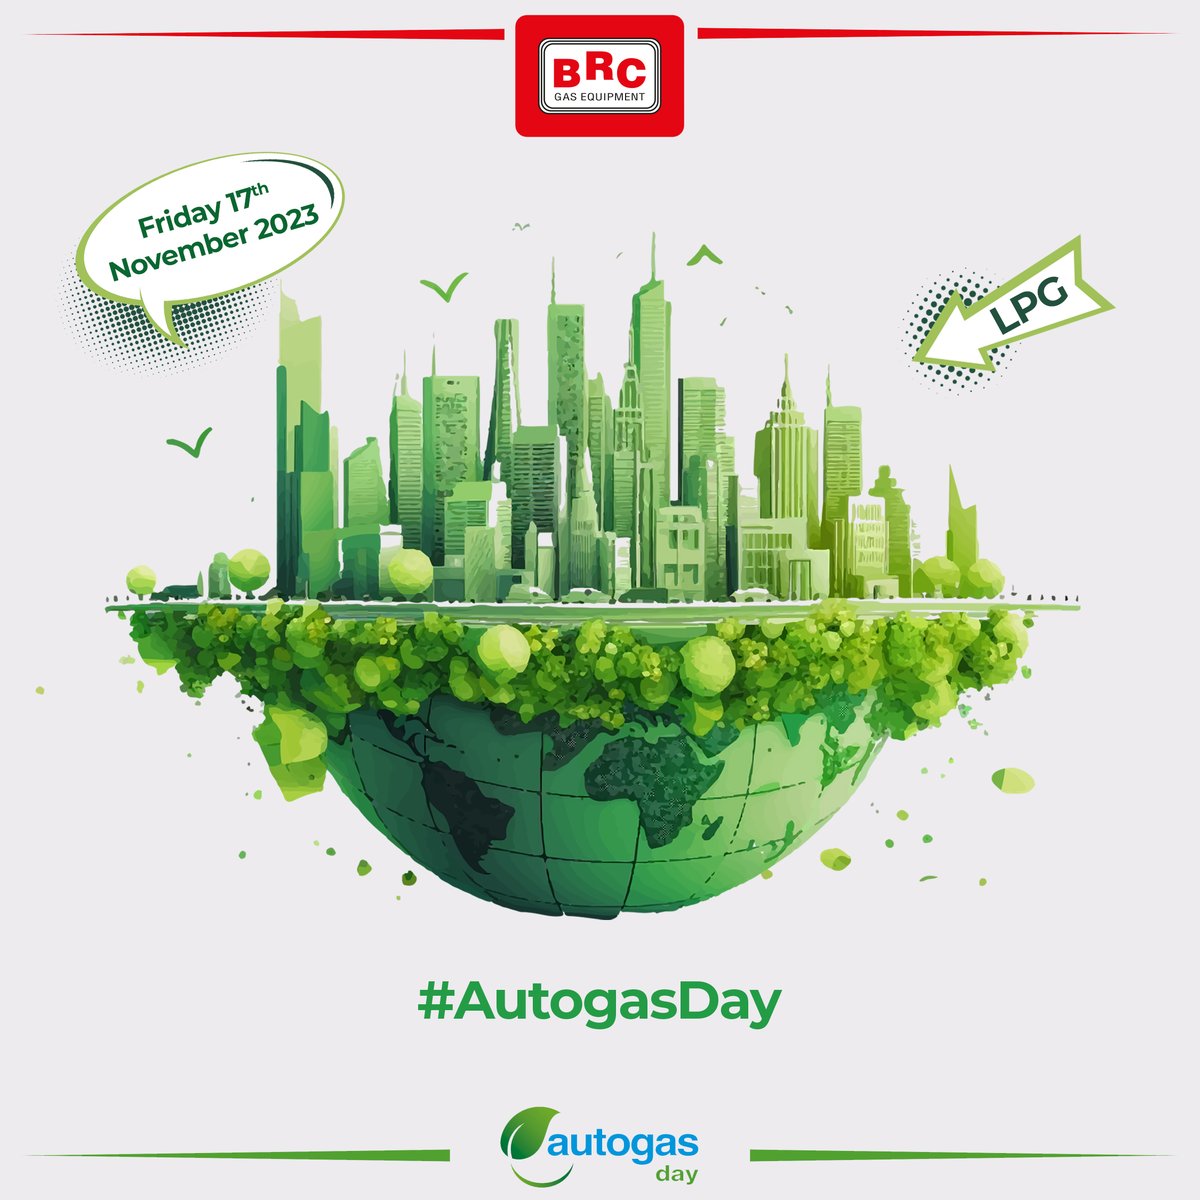 #AutogasDay will be on Friday 17th _11_ 2023!We would like to invite you to share your experience! Take a photo driving your LPG car, refueling, installing a gas system, and post it on socia media . Use the hashtag #AutogasDay. Tag @brcgasequipment